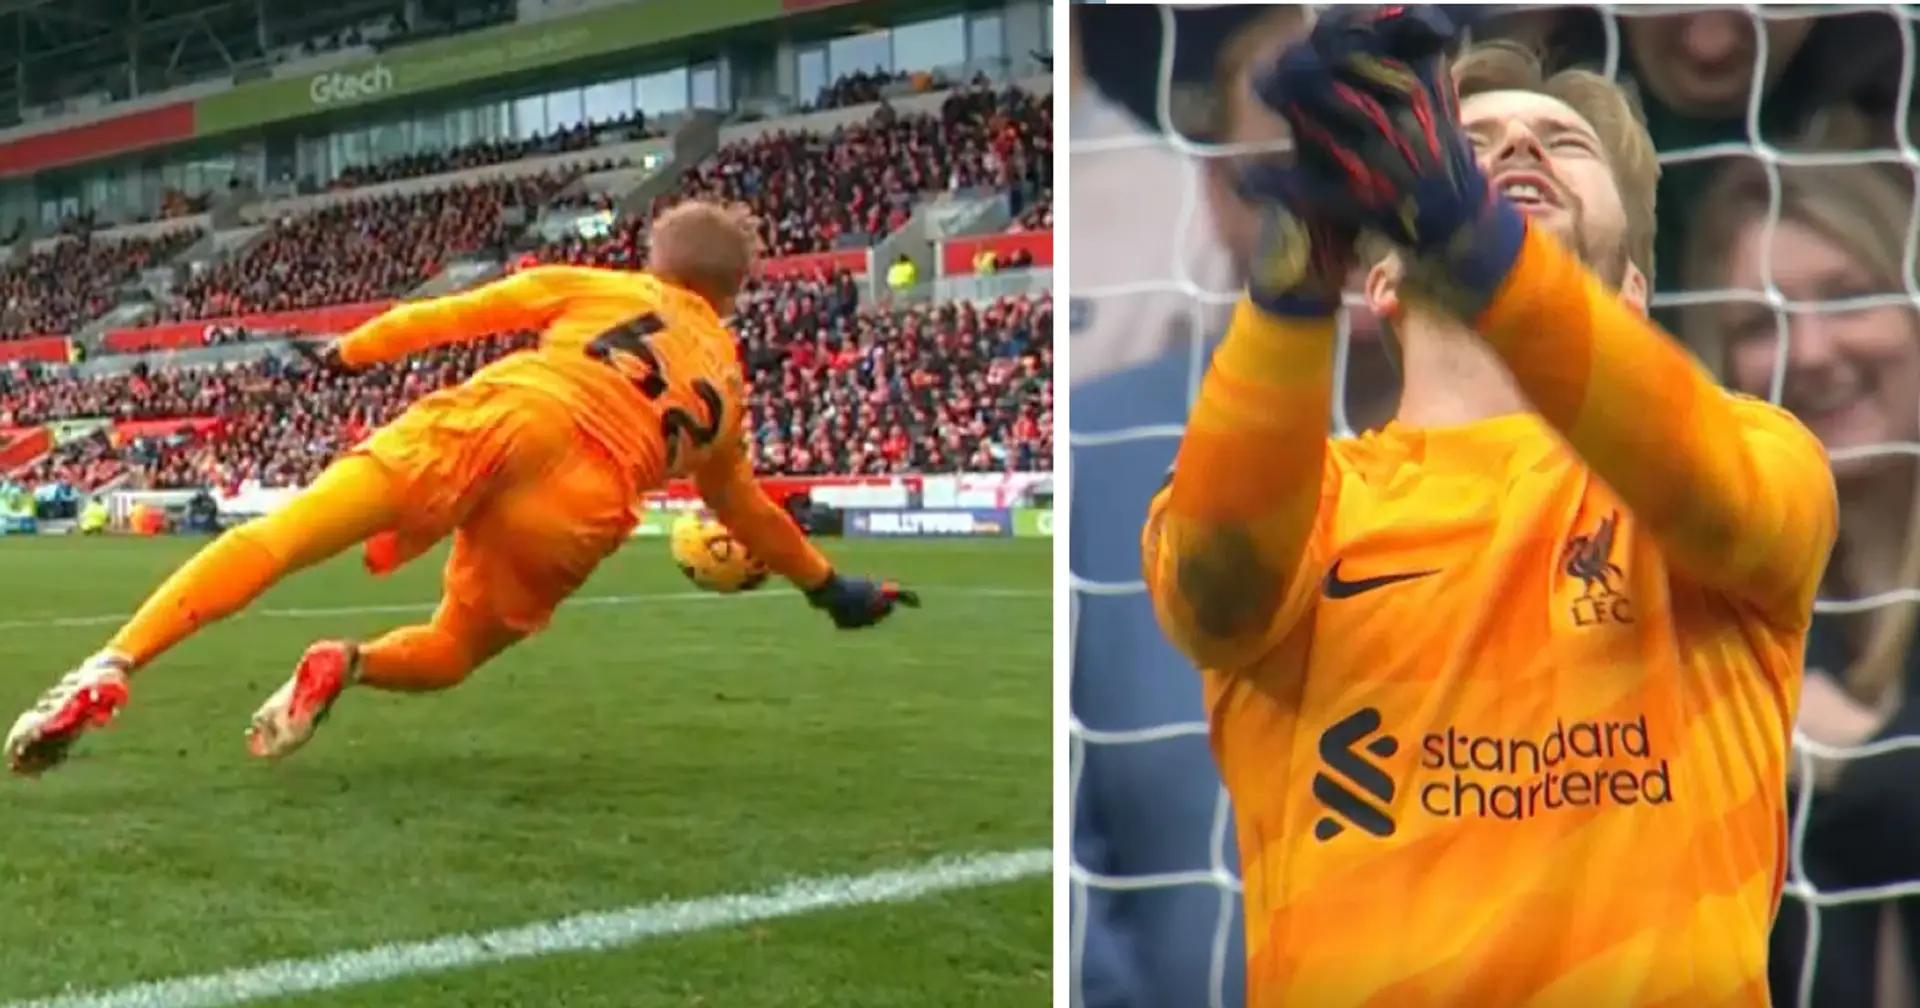 'After this consider me a Kelleher fan': Fans praise Liverpool keeper despite conceding a goal 